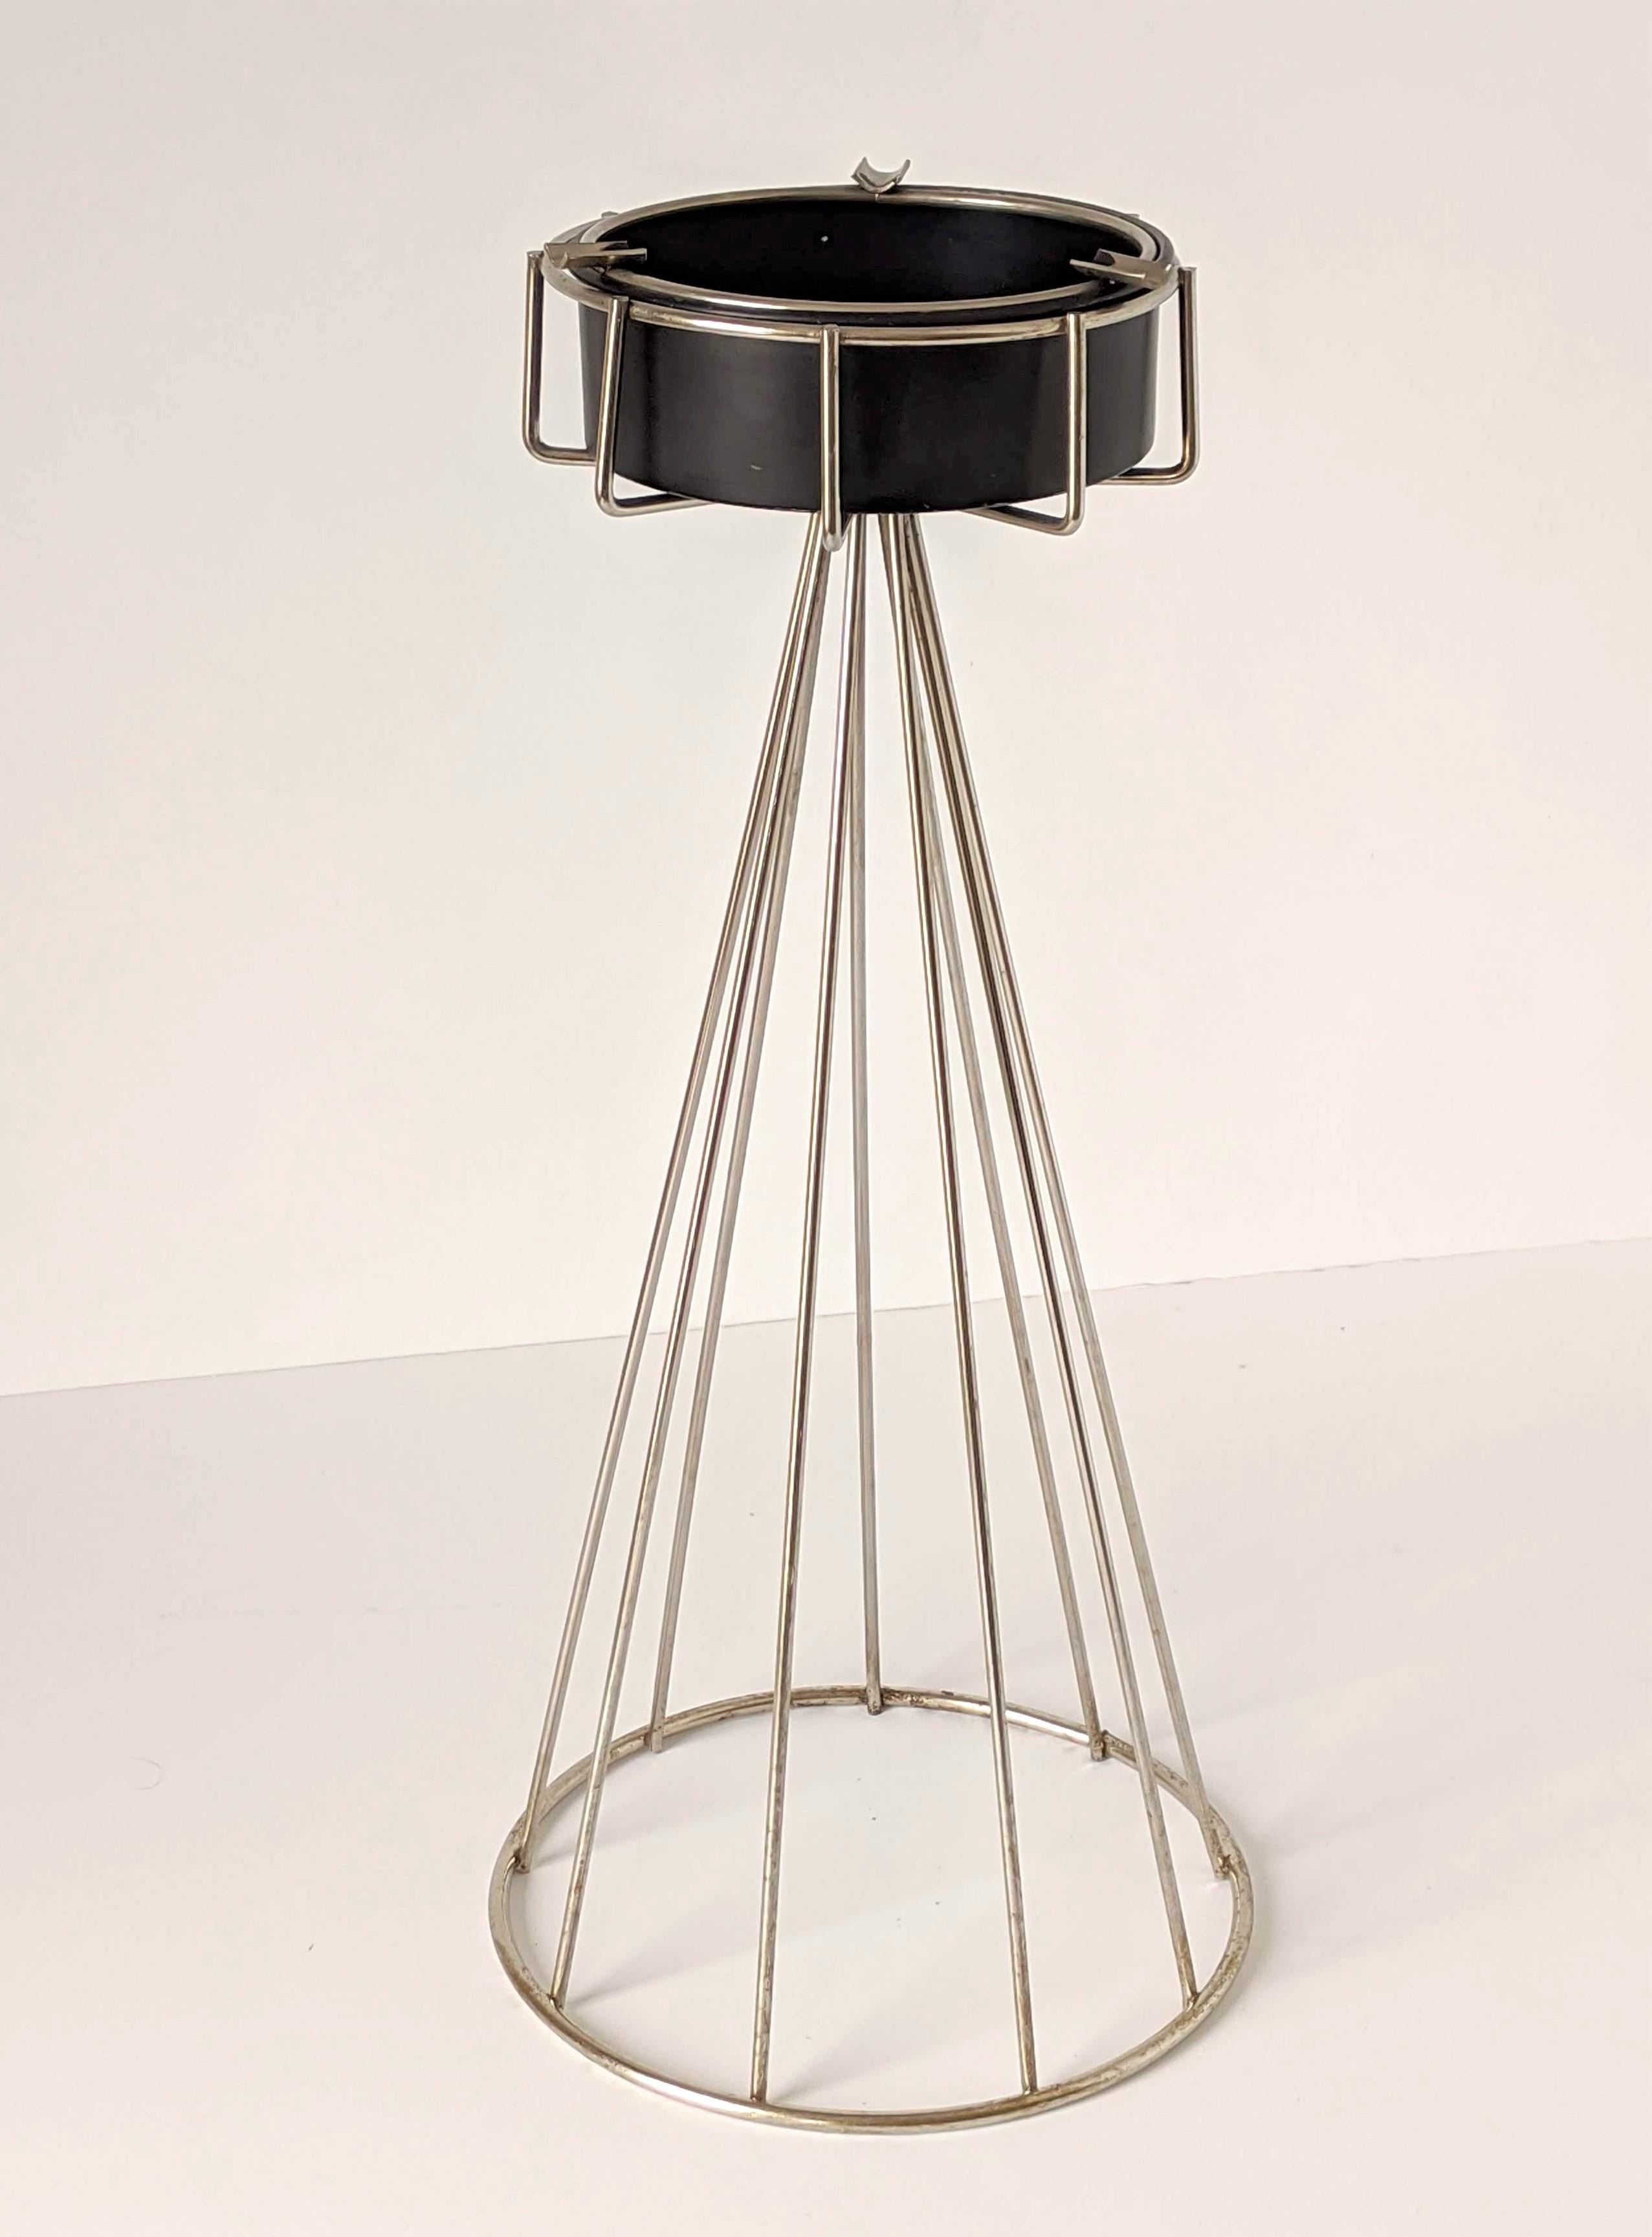 From the wire series an architectural chrome structure with an enameled black semi gloss ashtray.

Measure 20.5 inches high. 

Ashtray is 6 in. wide.